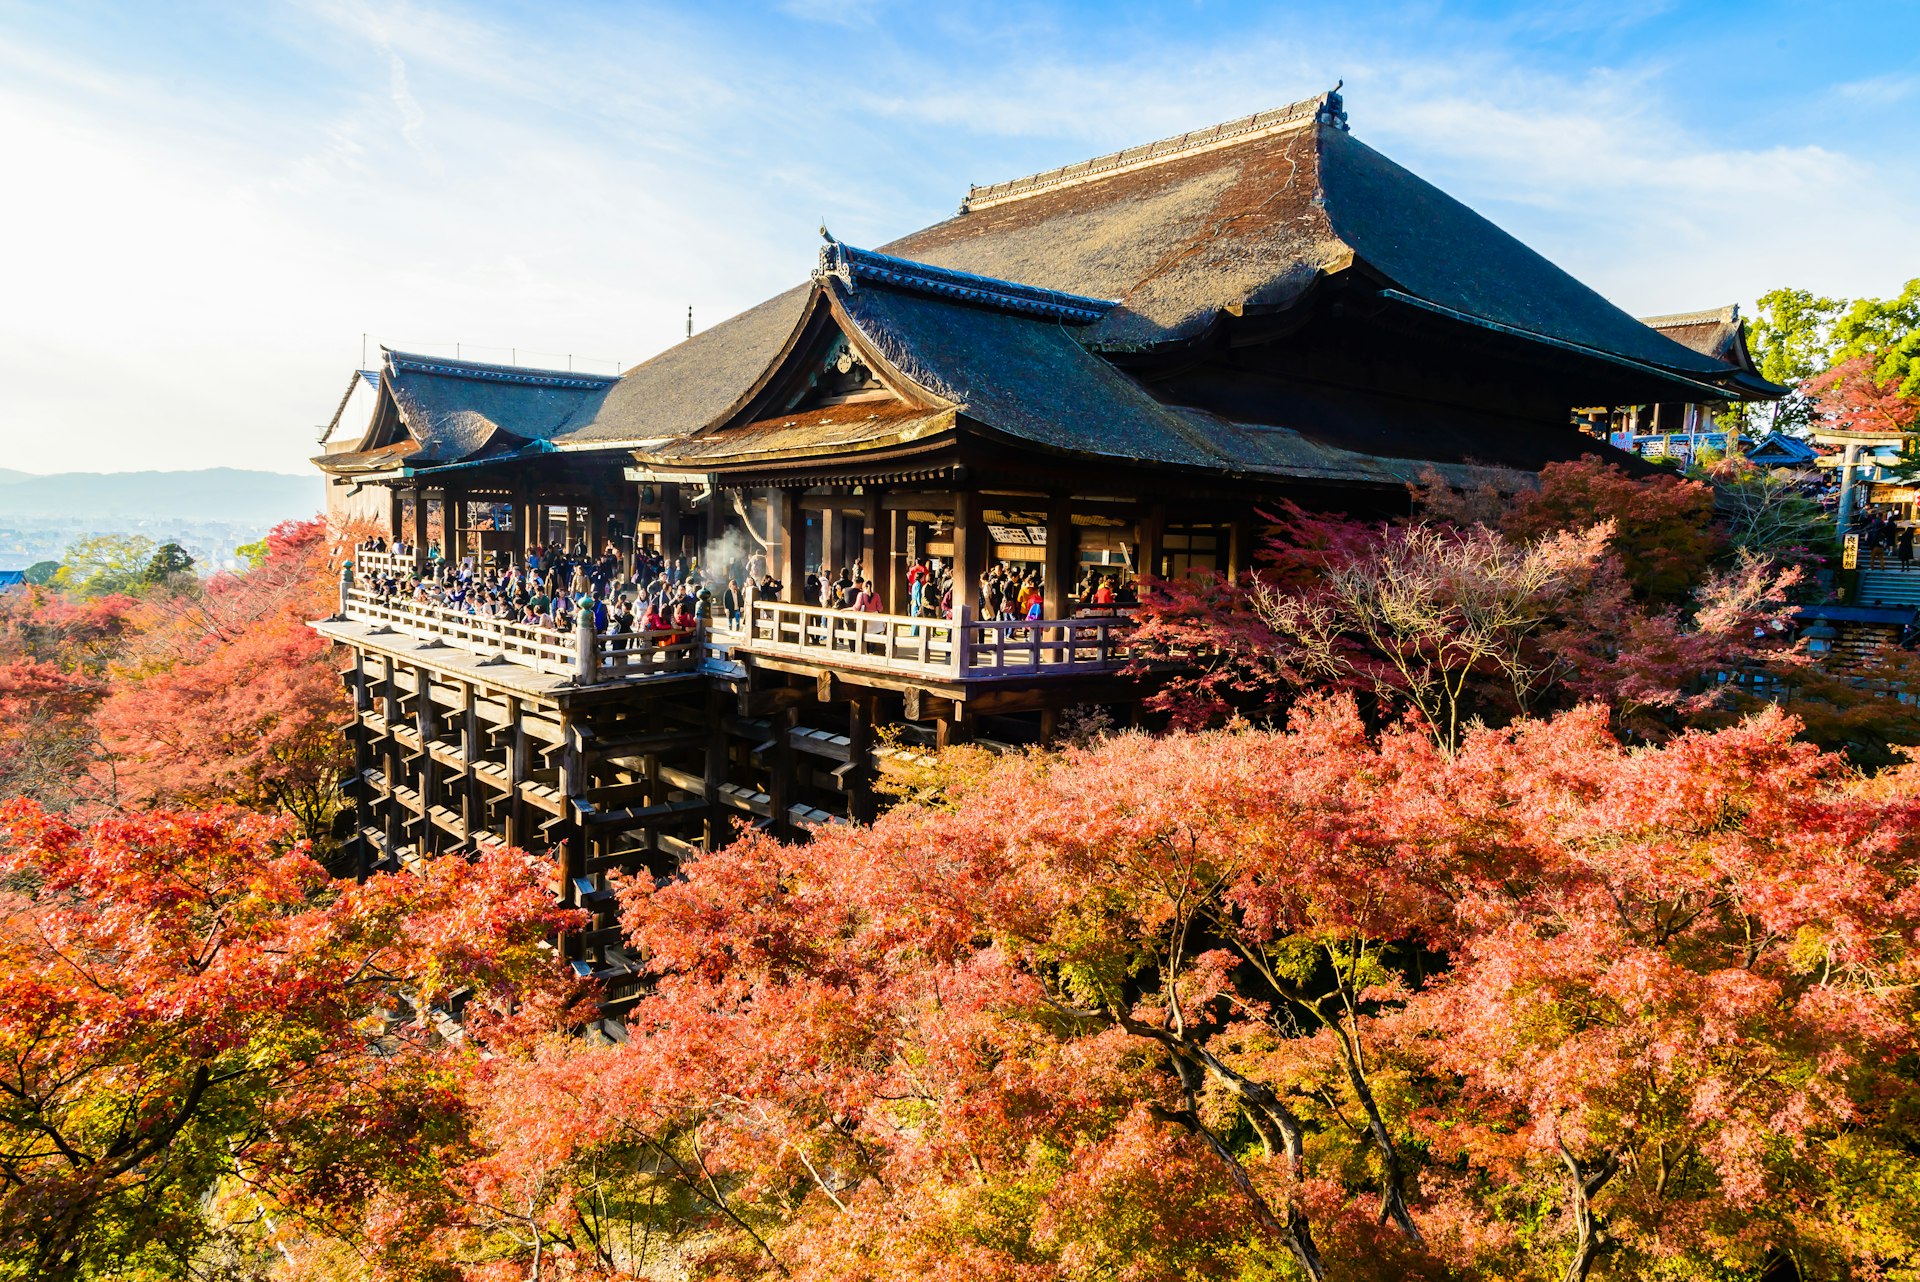 Groups of tourists gather on the balconies of a large wooden temple surrounded by autumn foliage